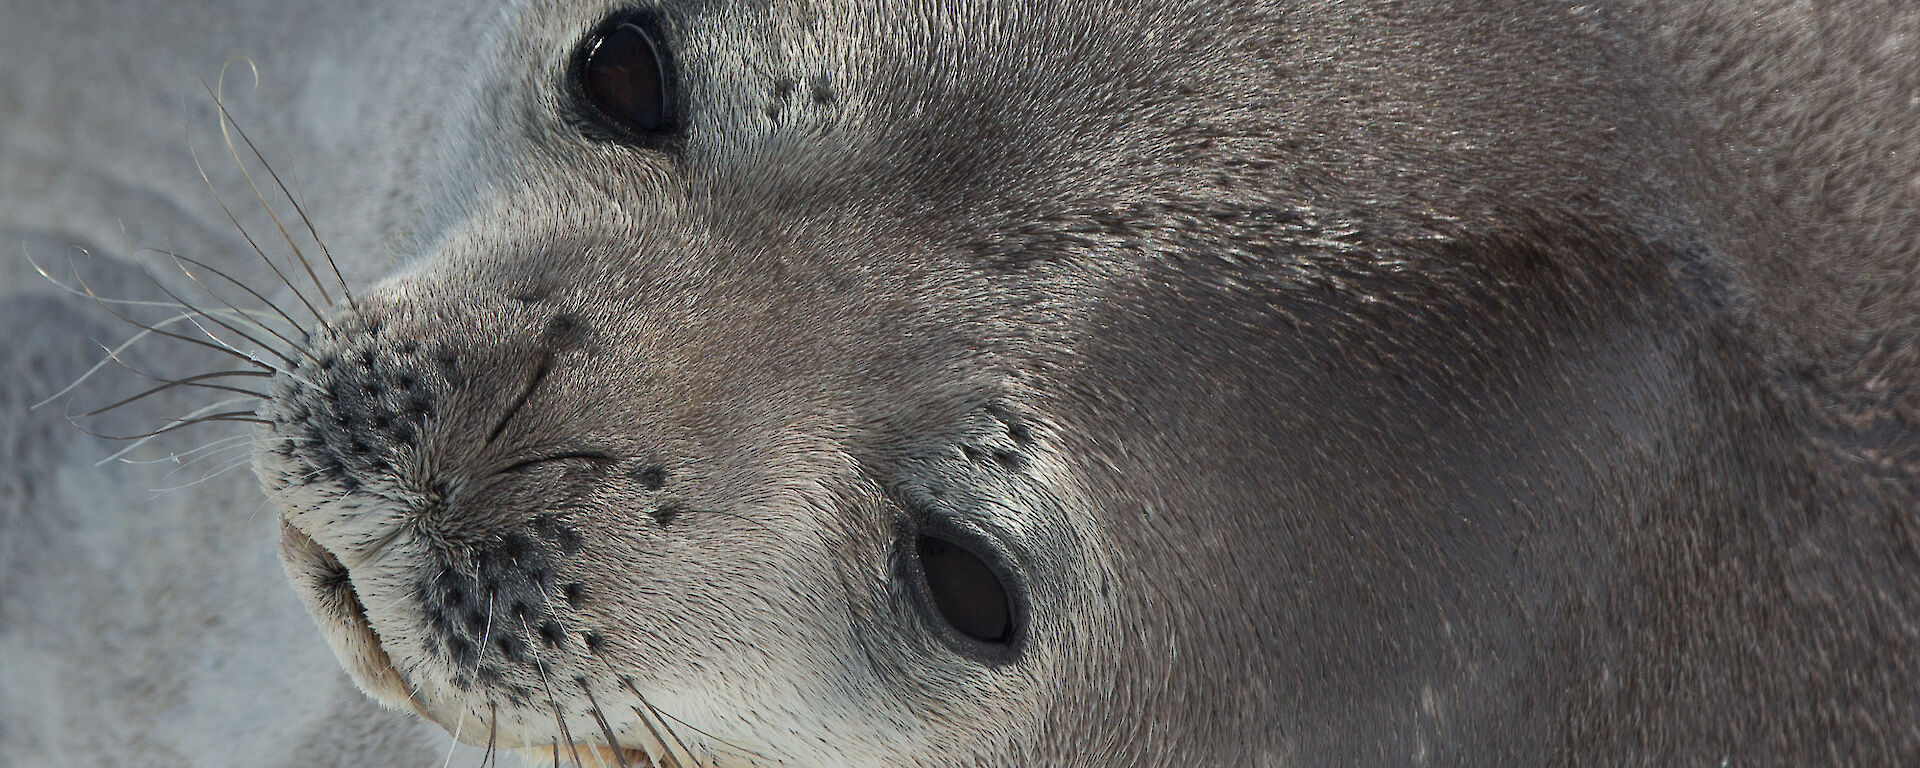 Full frame of weddell seals face lying on its side.